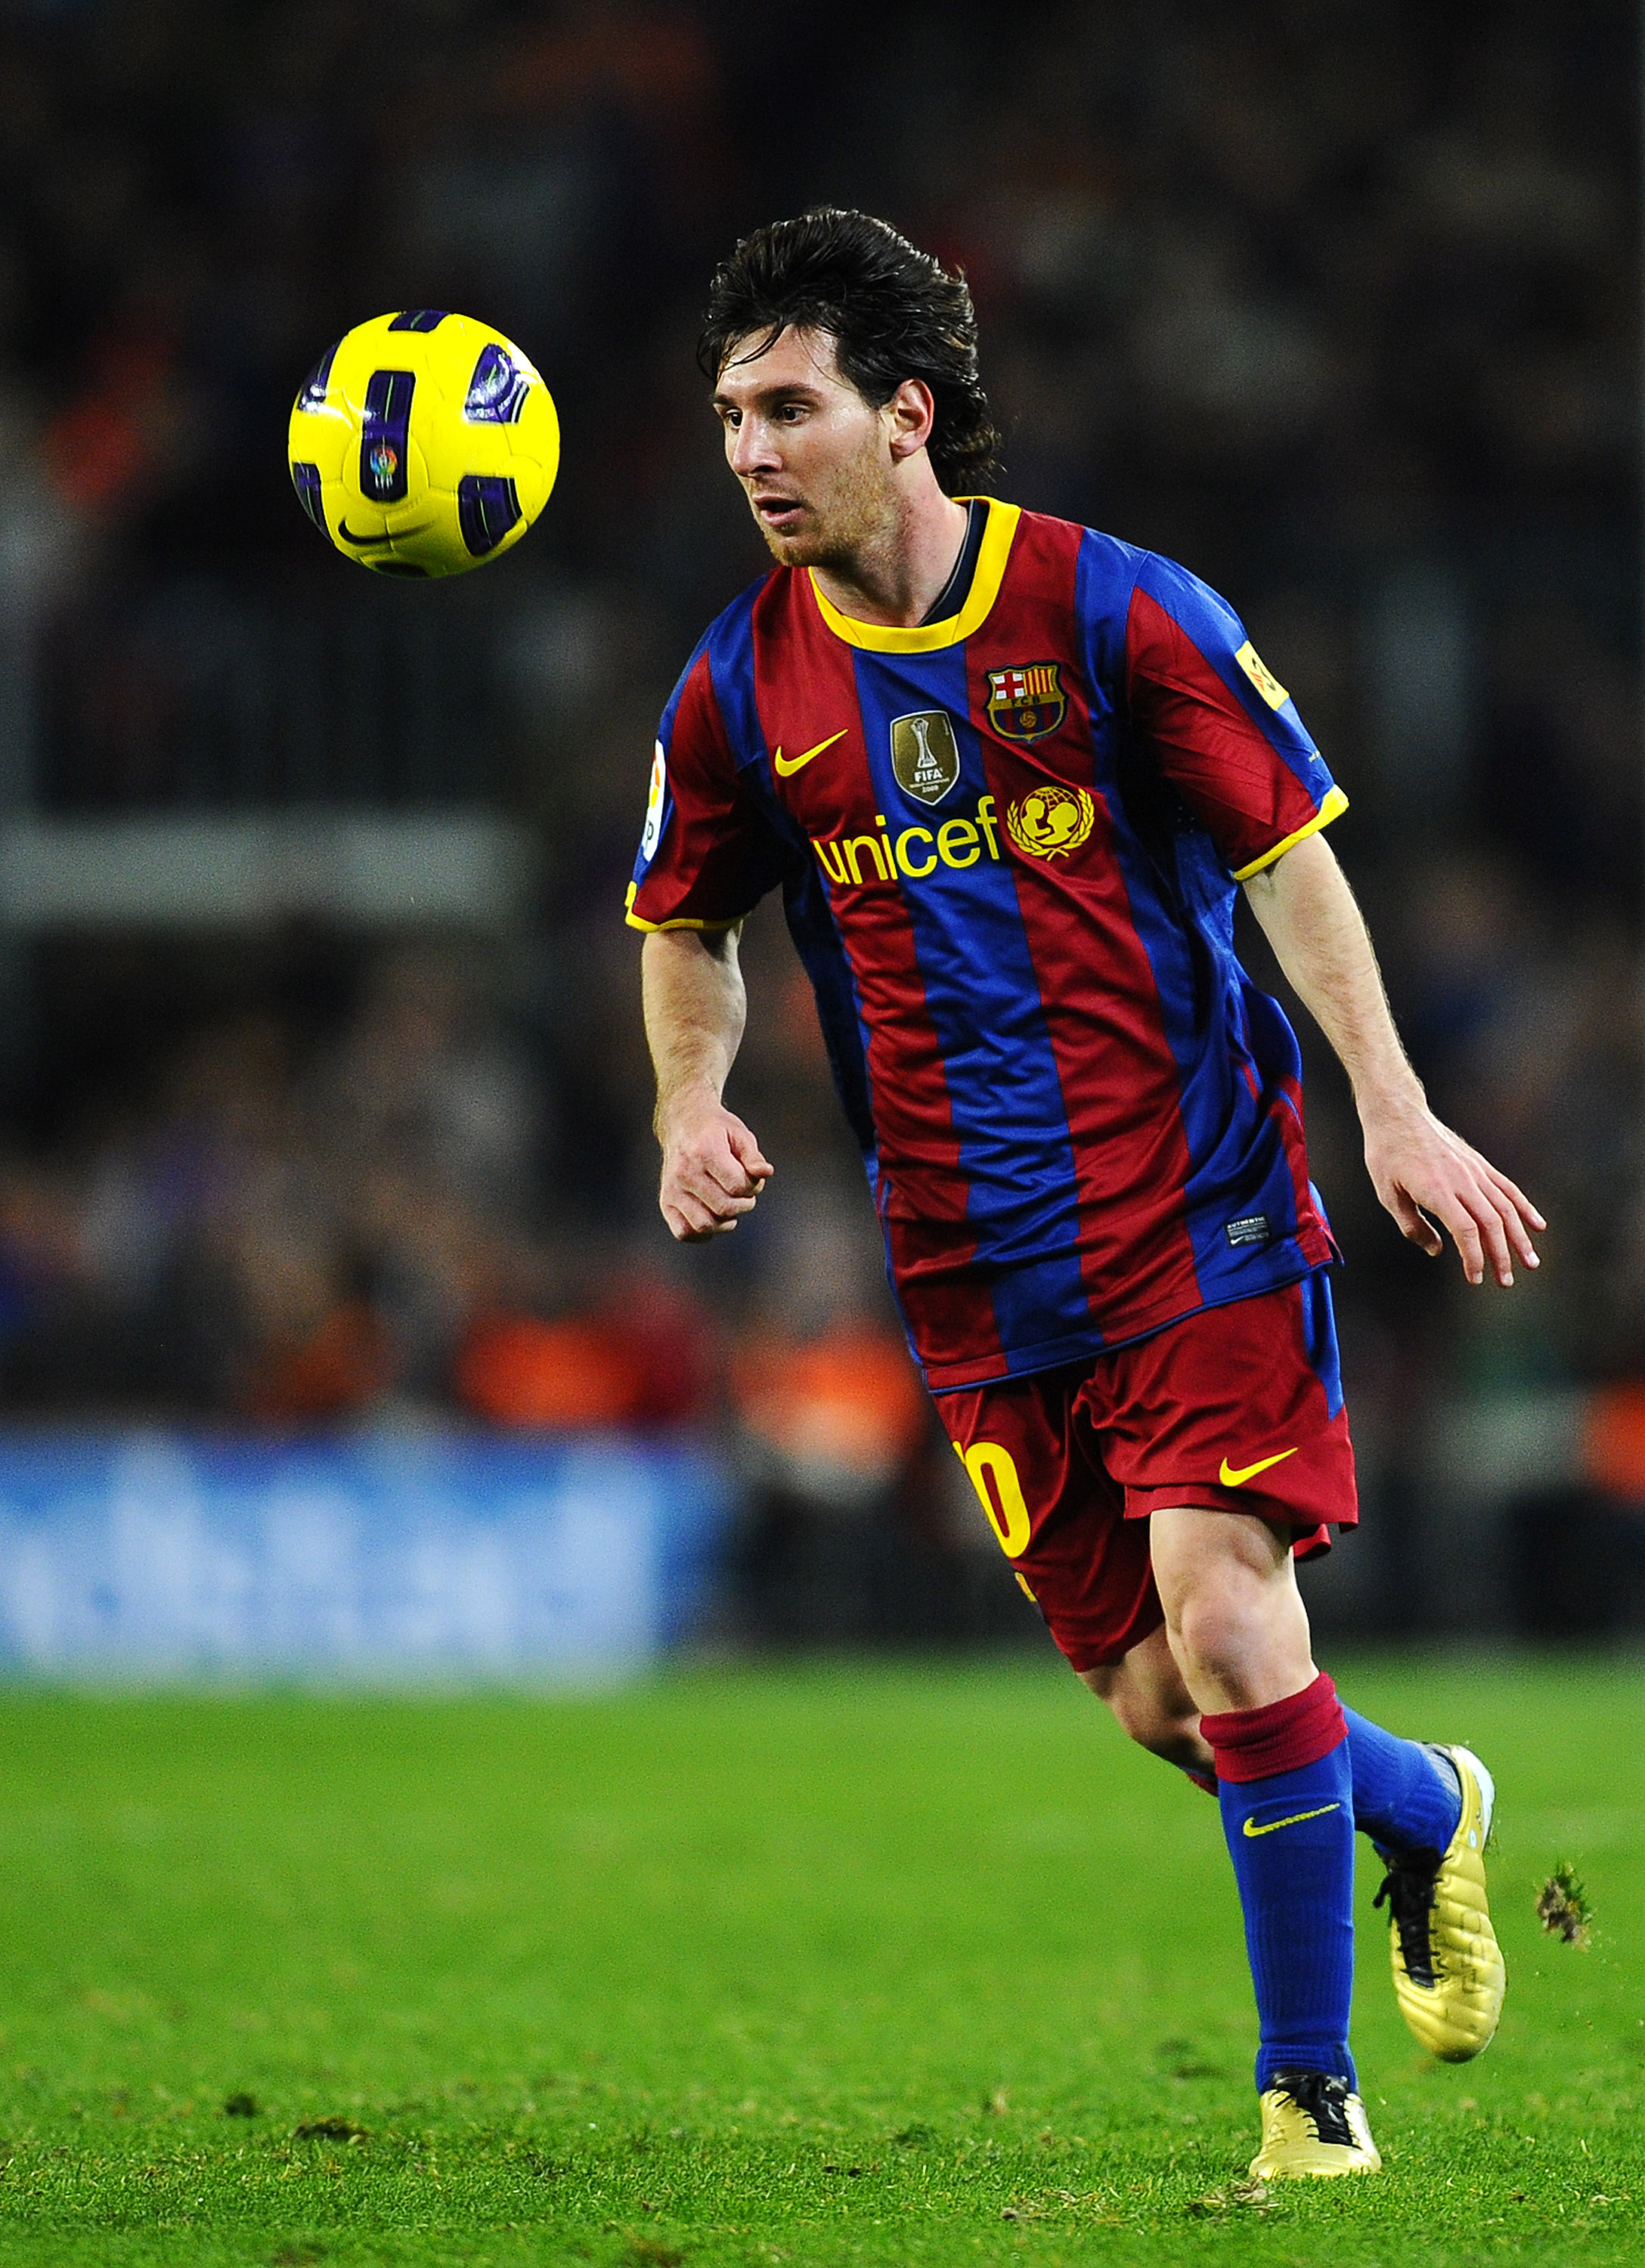 BARCELONA, SPAIN - NOVEMBER 13:  Lionel Messi of Barcelona controls the ball during the La Liga match between Barcelona and Villarreal CF at Camp Nou Stadium on November 13, 2010 in Barcelona, Spain. Barcelona won the match 3-1.  (Photo by David Ramos/Get